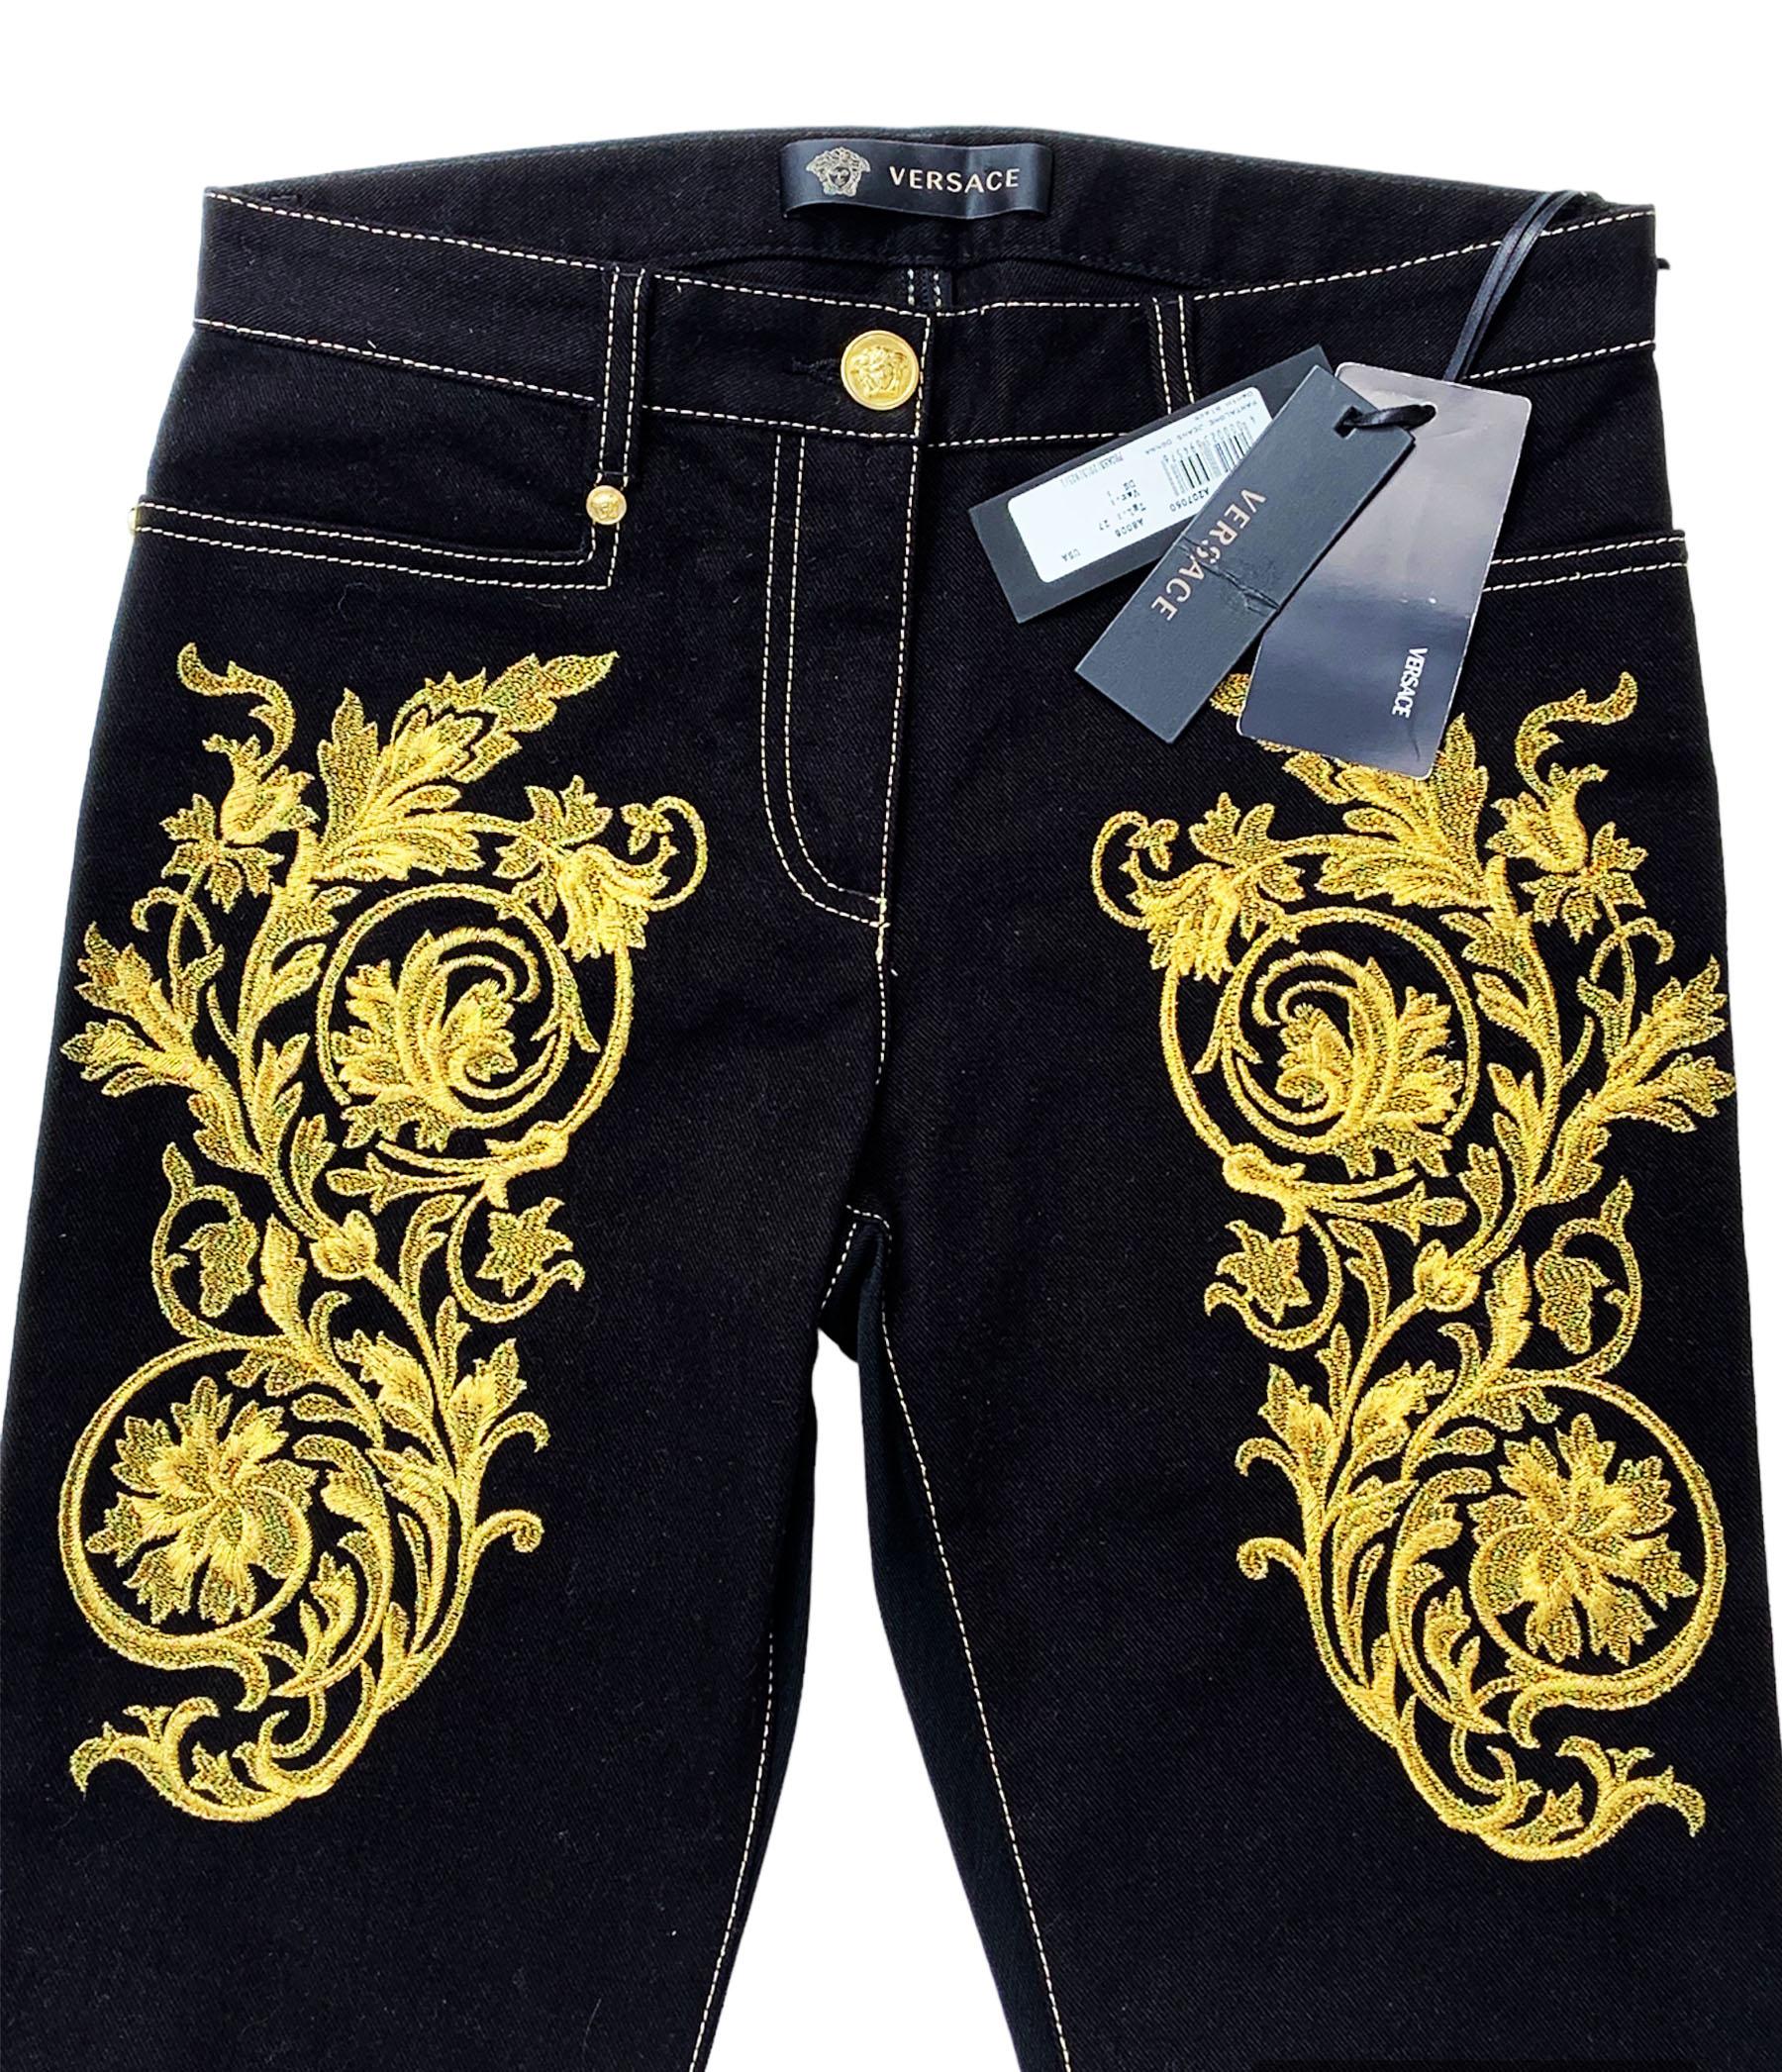 NWT Versace $2150 Black Gold Baroque Embroidery Stretch Jeans size 27 and 26 For Sale 1